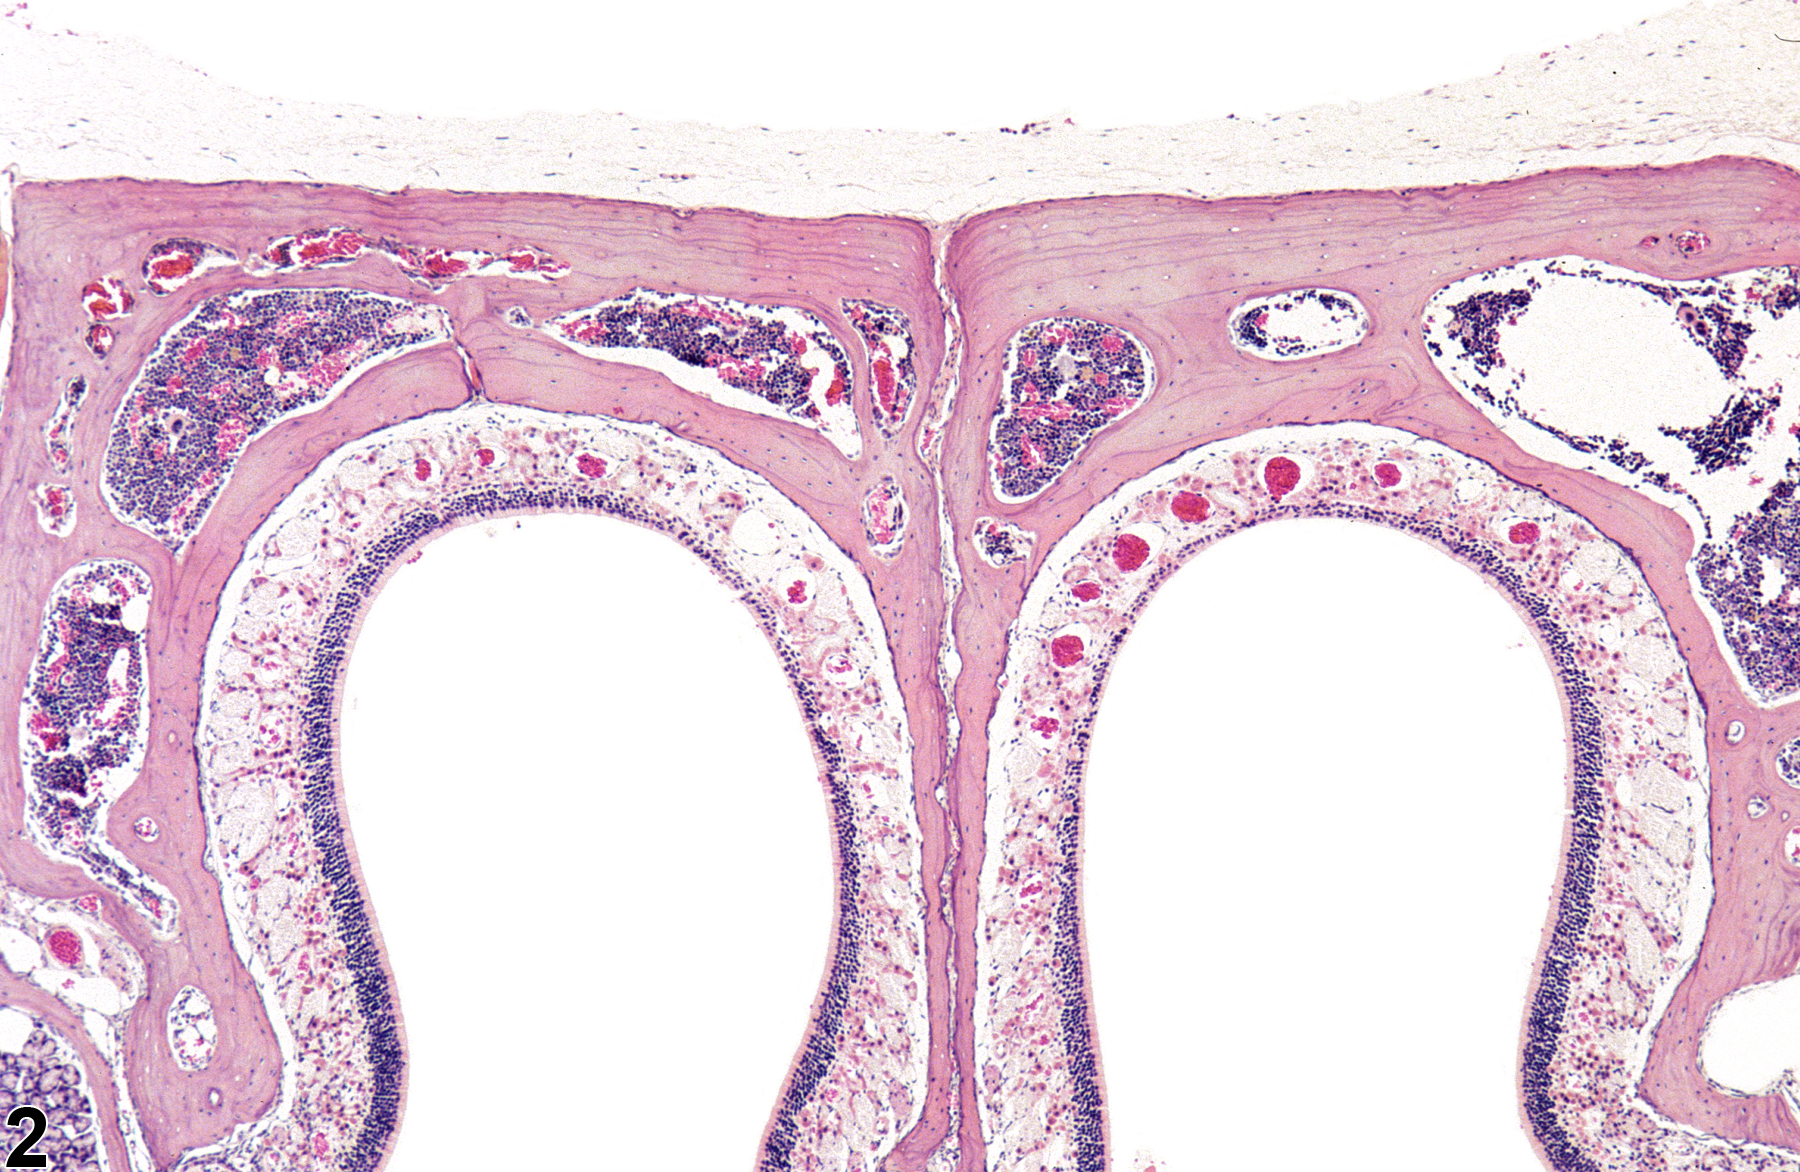 Image of atrophy in the nose, olfactory epithelium from a male B6C3F1/N mouse in a chronic study